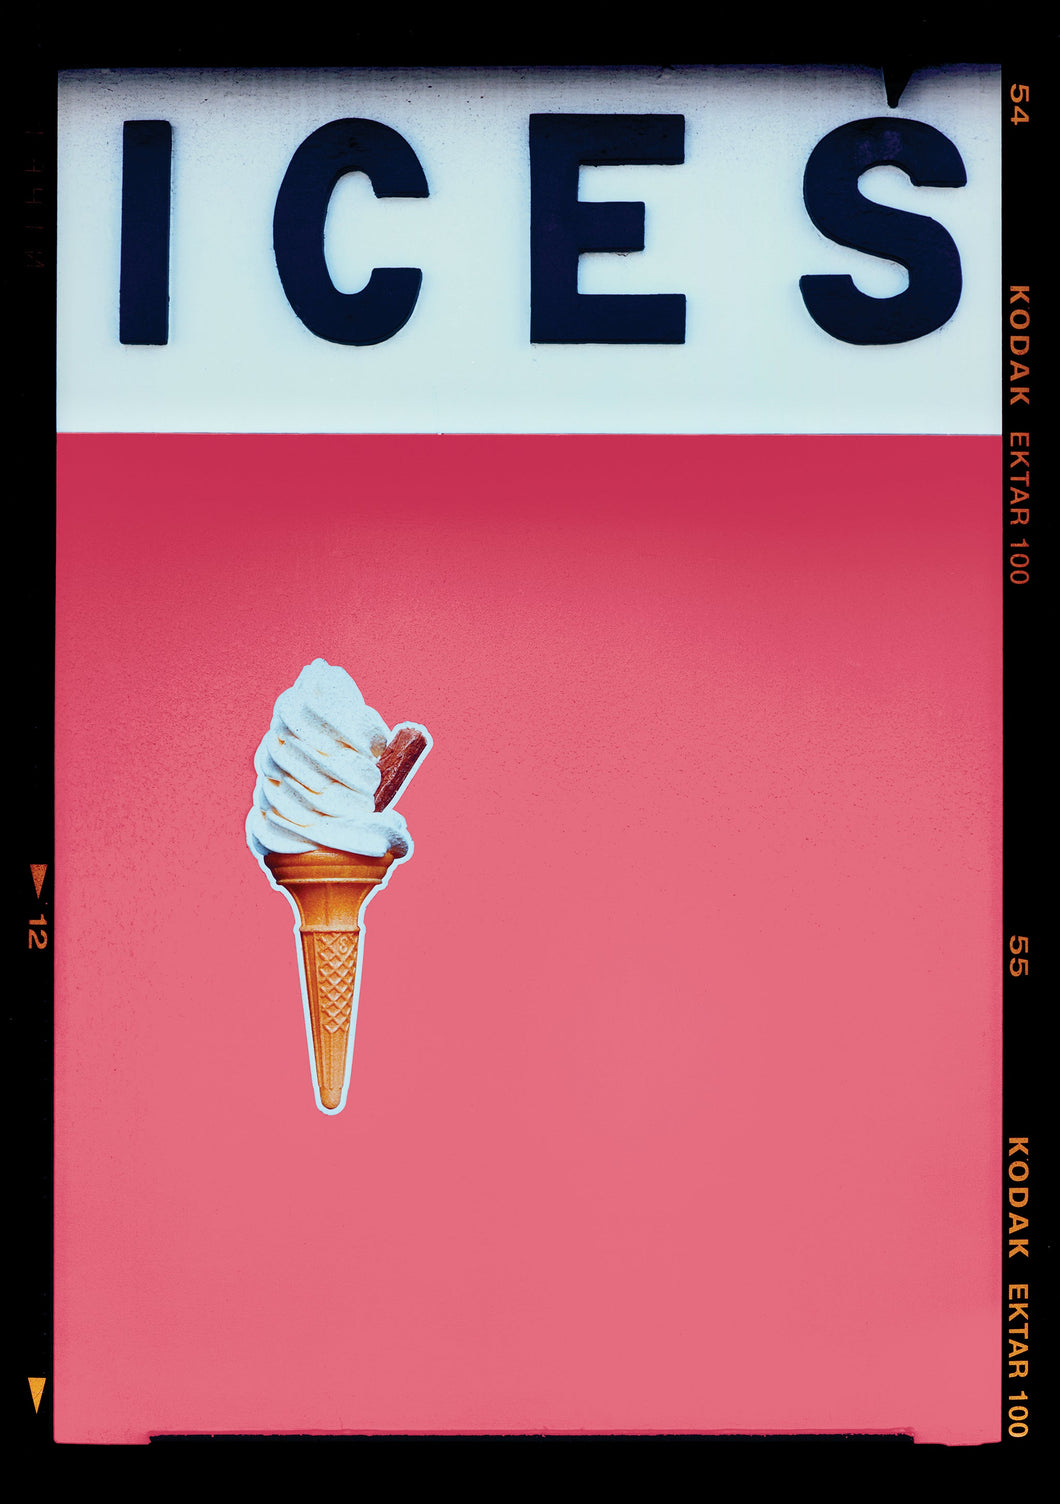 Ices Coral - Richard Heeps 70x55cm White frame